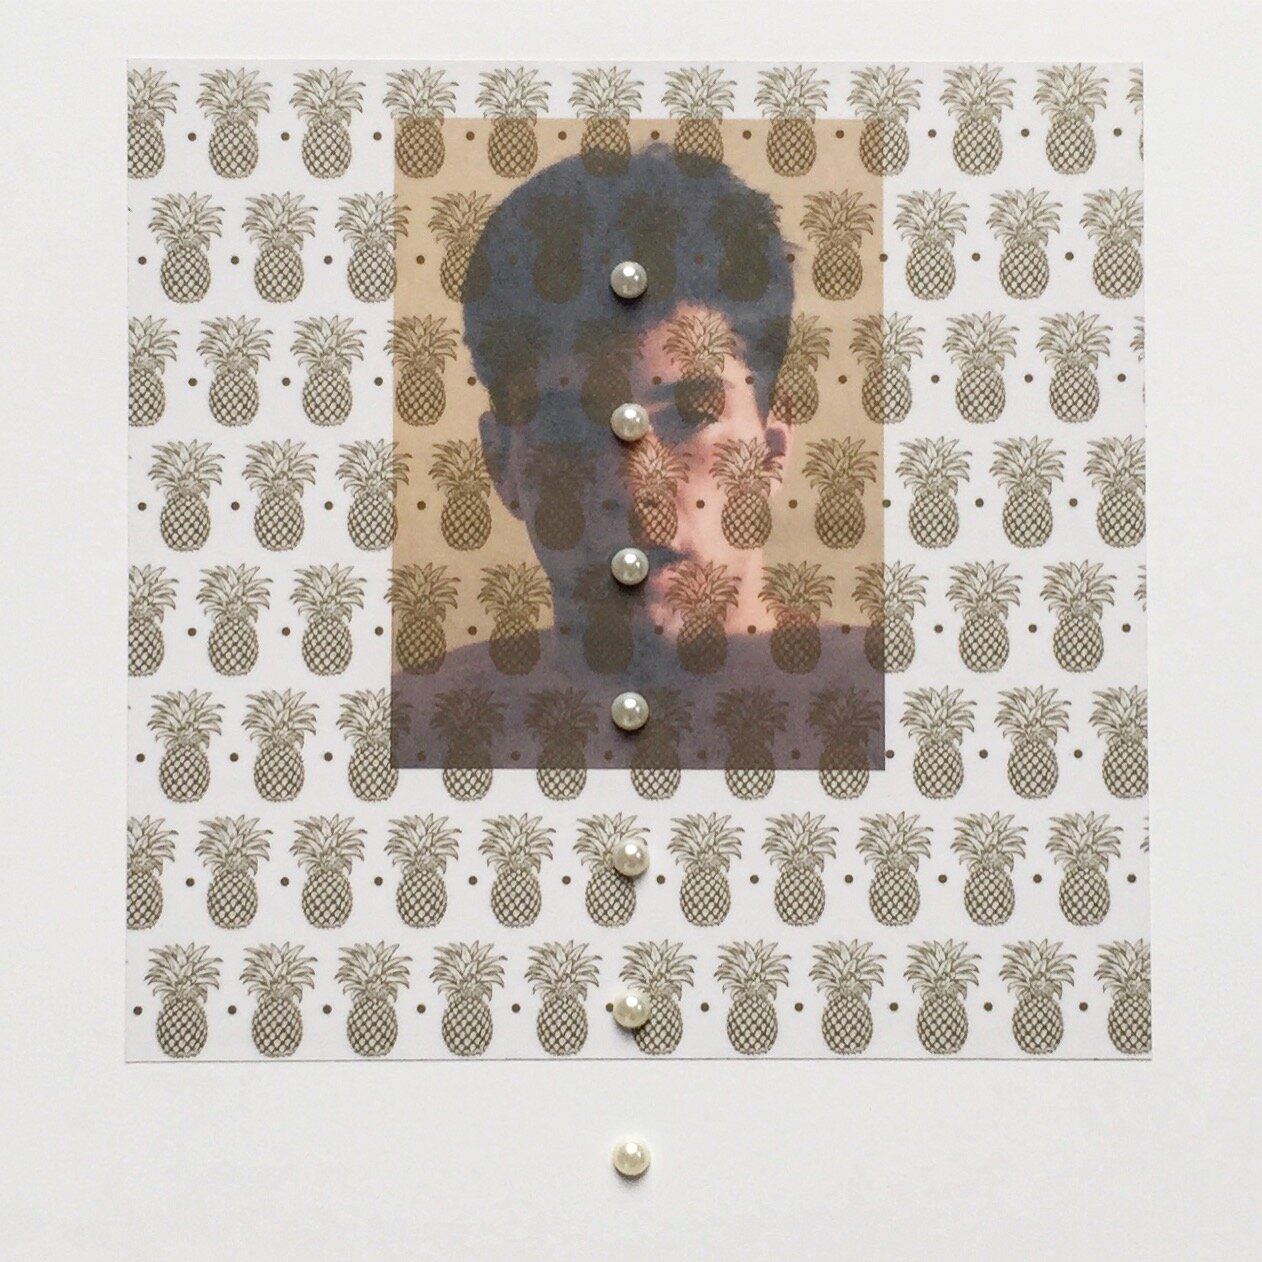   “Bobby Madison” (Welcome)&nbsp;  Appropriated image, printed Mylar &amp; fake pearls on Bristol&nbsp; 2017&nbsp; 